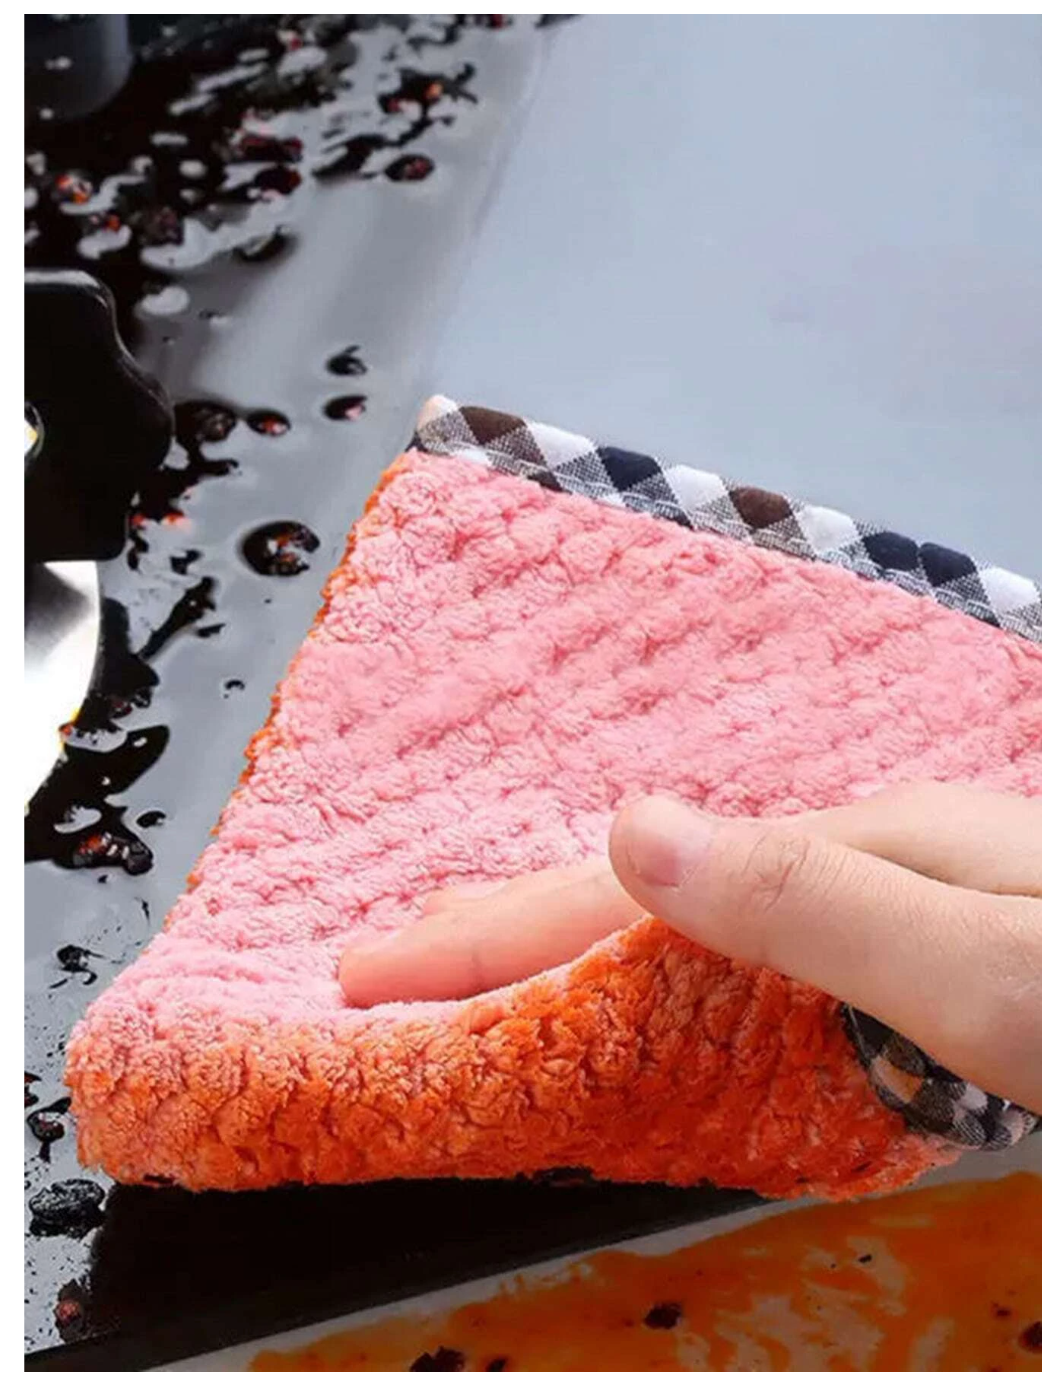 Pretty in Pink Cleanup: Elevate Your Kitchen Shine with the 5pcs Modernist Fiber Cleaning Cloth Set!